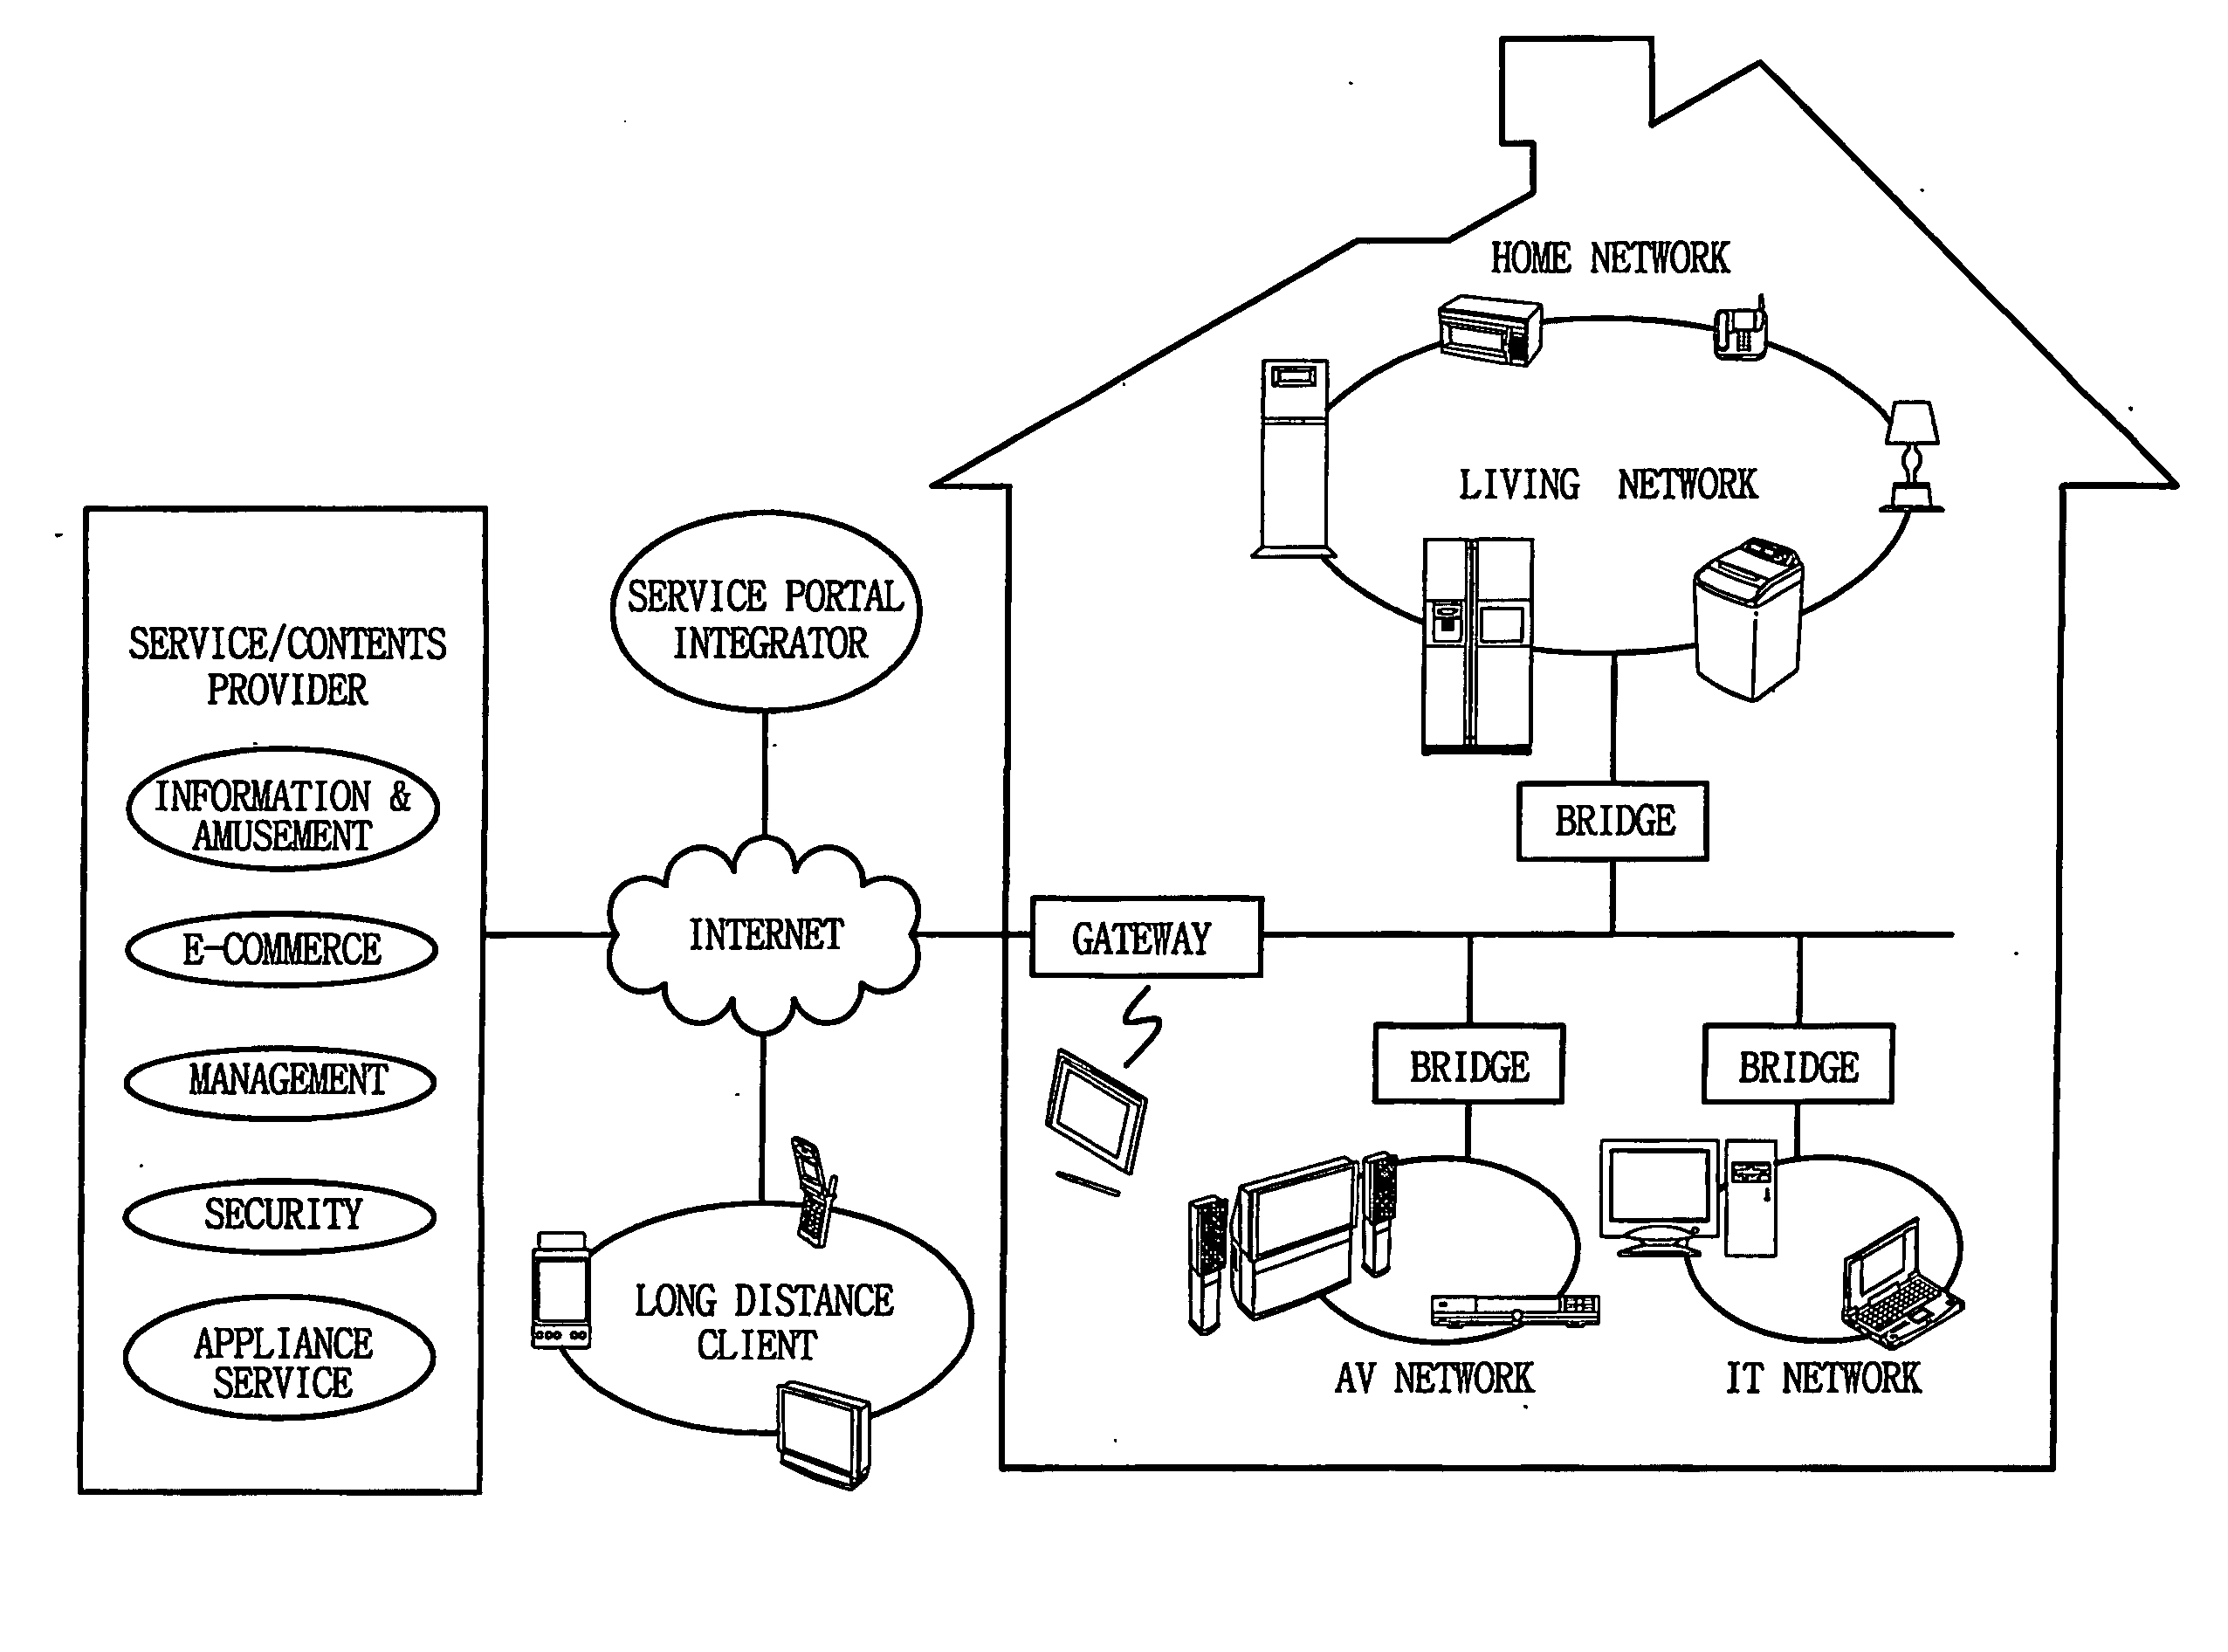 Home network system